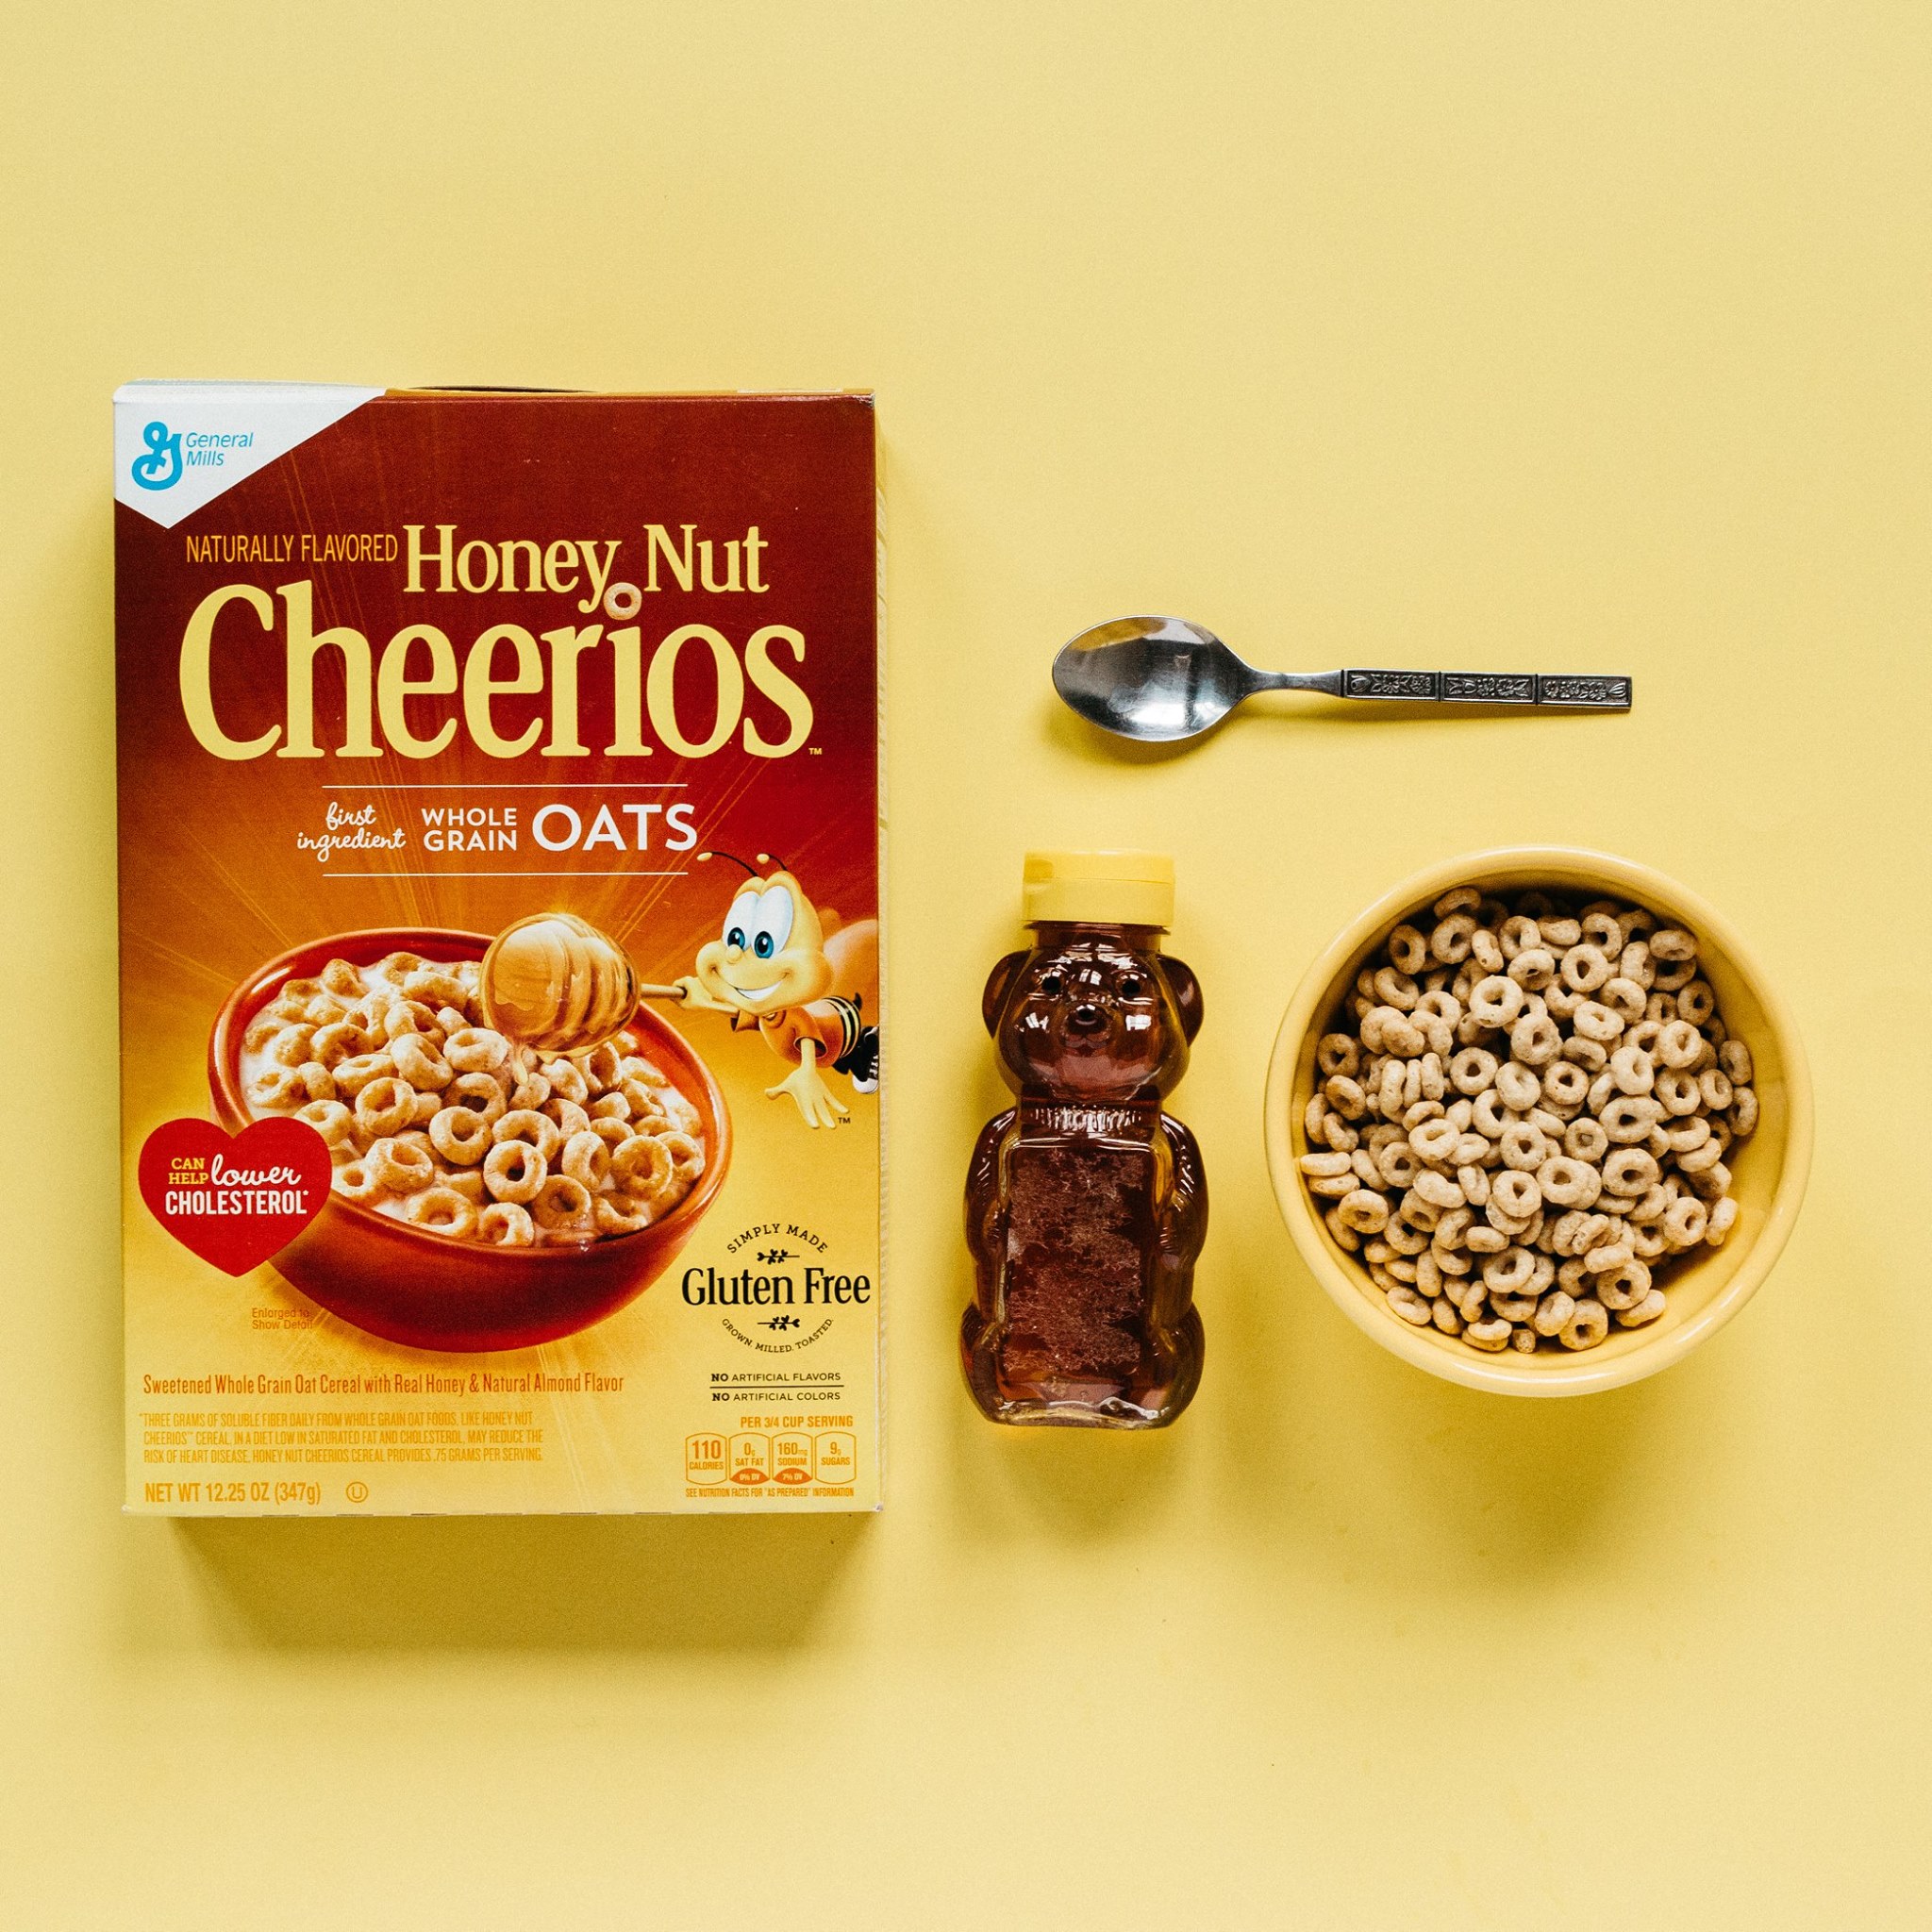 General Mills has announced that it will voluntarily remove the "g...